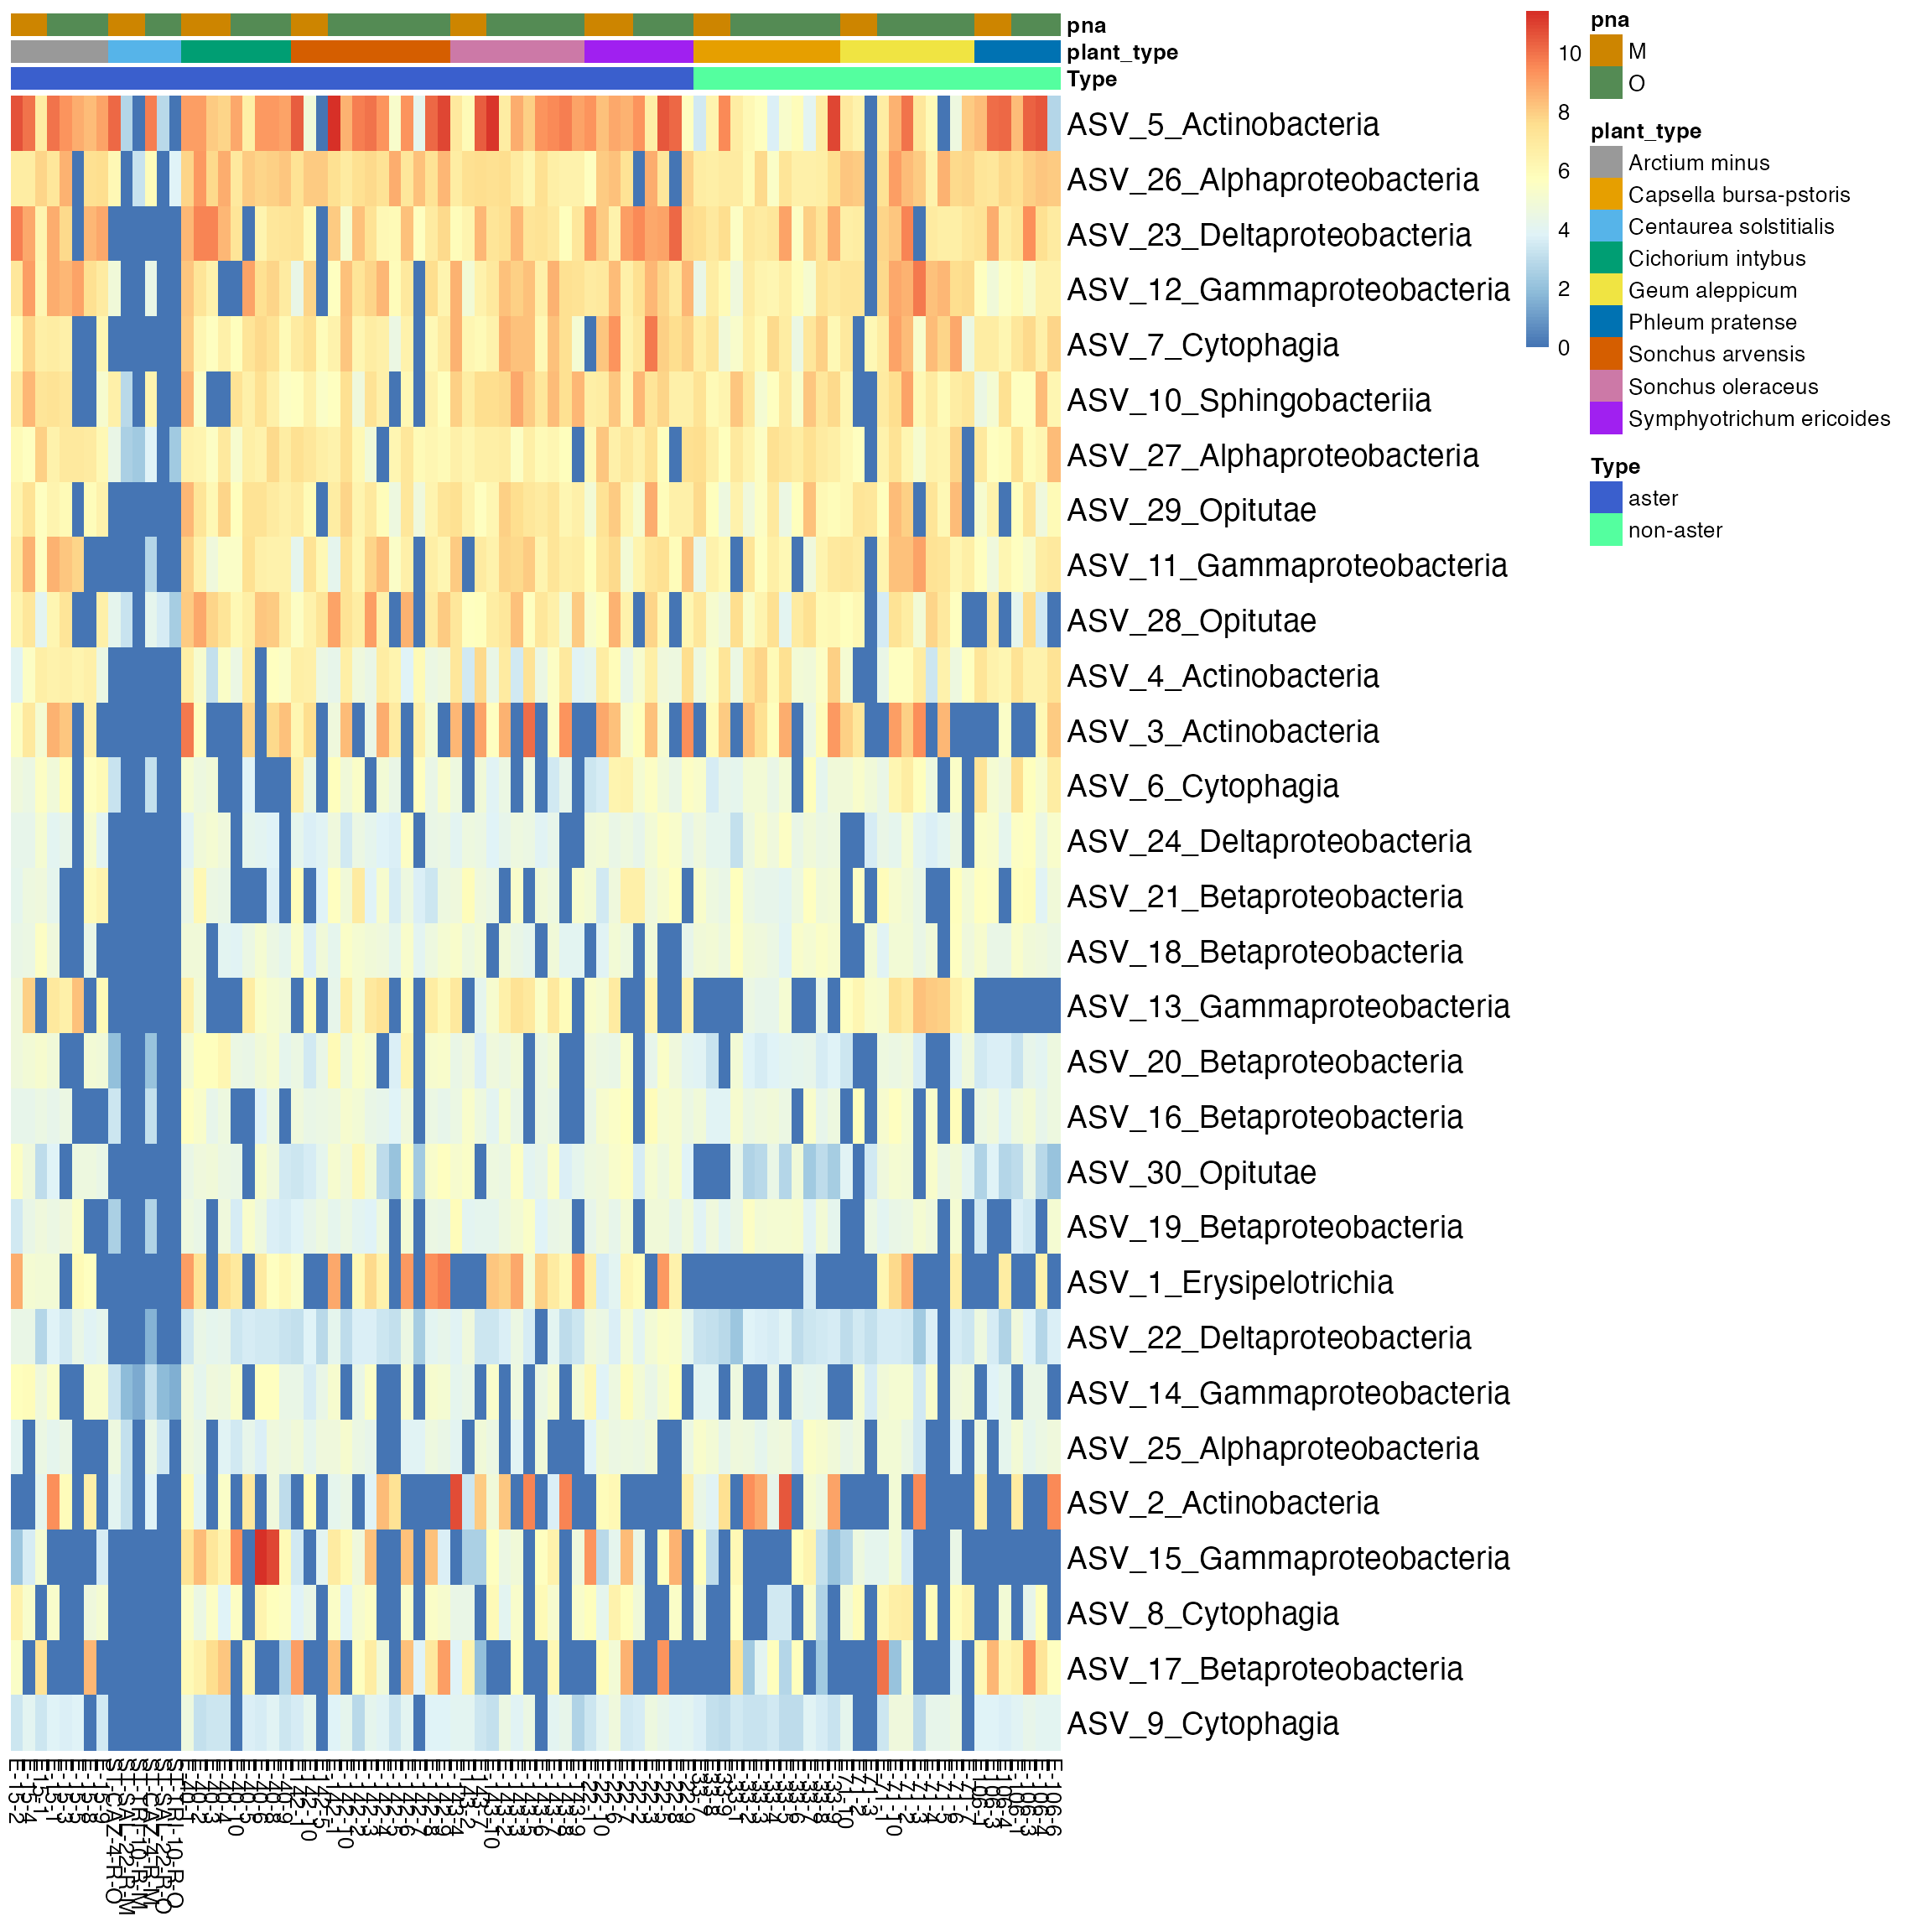 Figure 3: Thirty most abundant ASVs were selected in all specimens. Taxa are labeled by Class on rows, and specimens are on the columns of the heatmap. Some specimens from Centaurea solstitialis plant have the most abundant ASVs of the Class Actinobacteria, Alphaproteobacteria, Sphingobacteria, and Gammaproteobacteria.